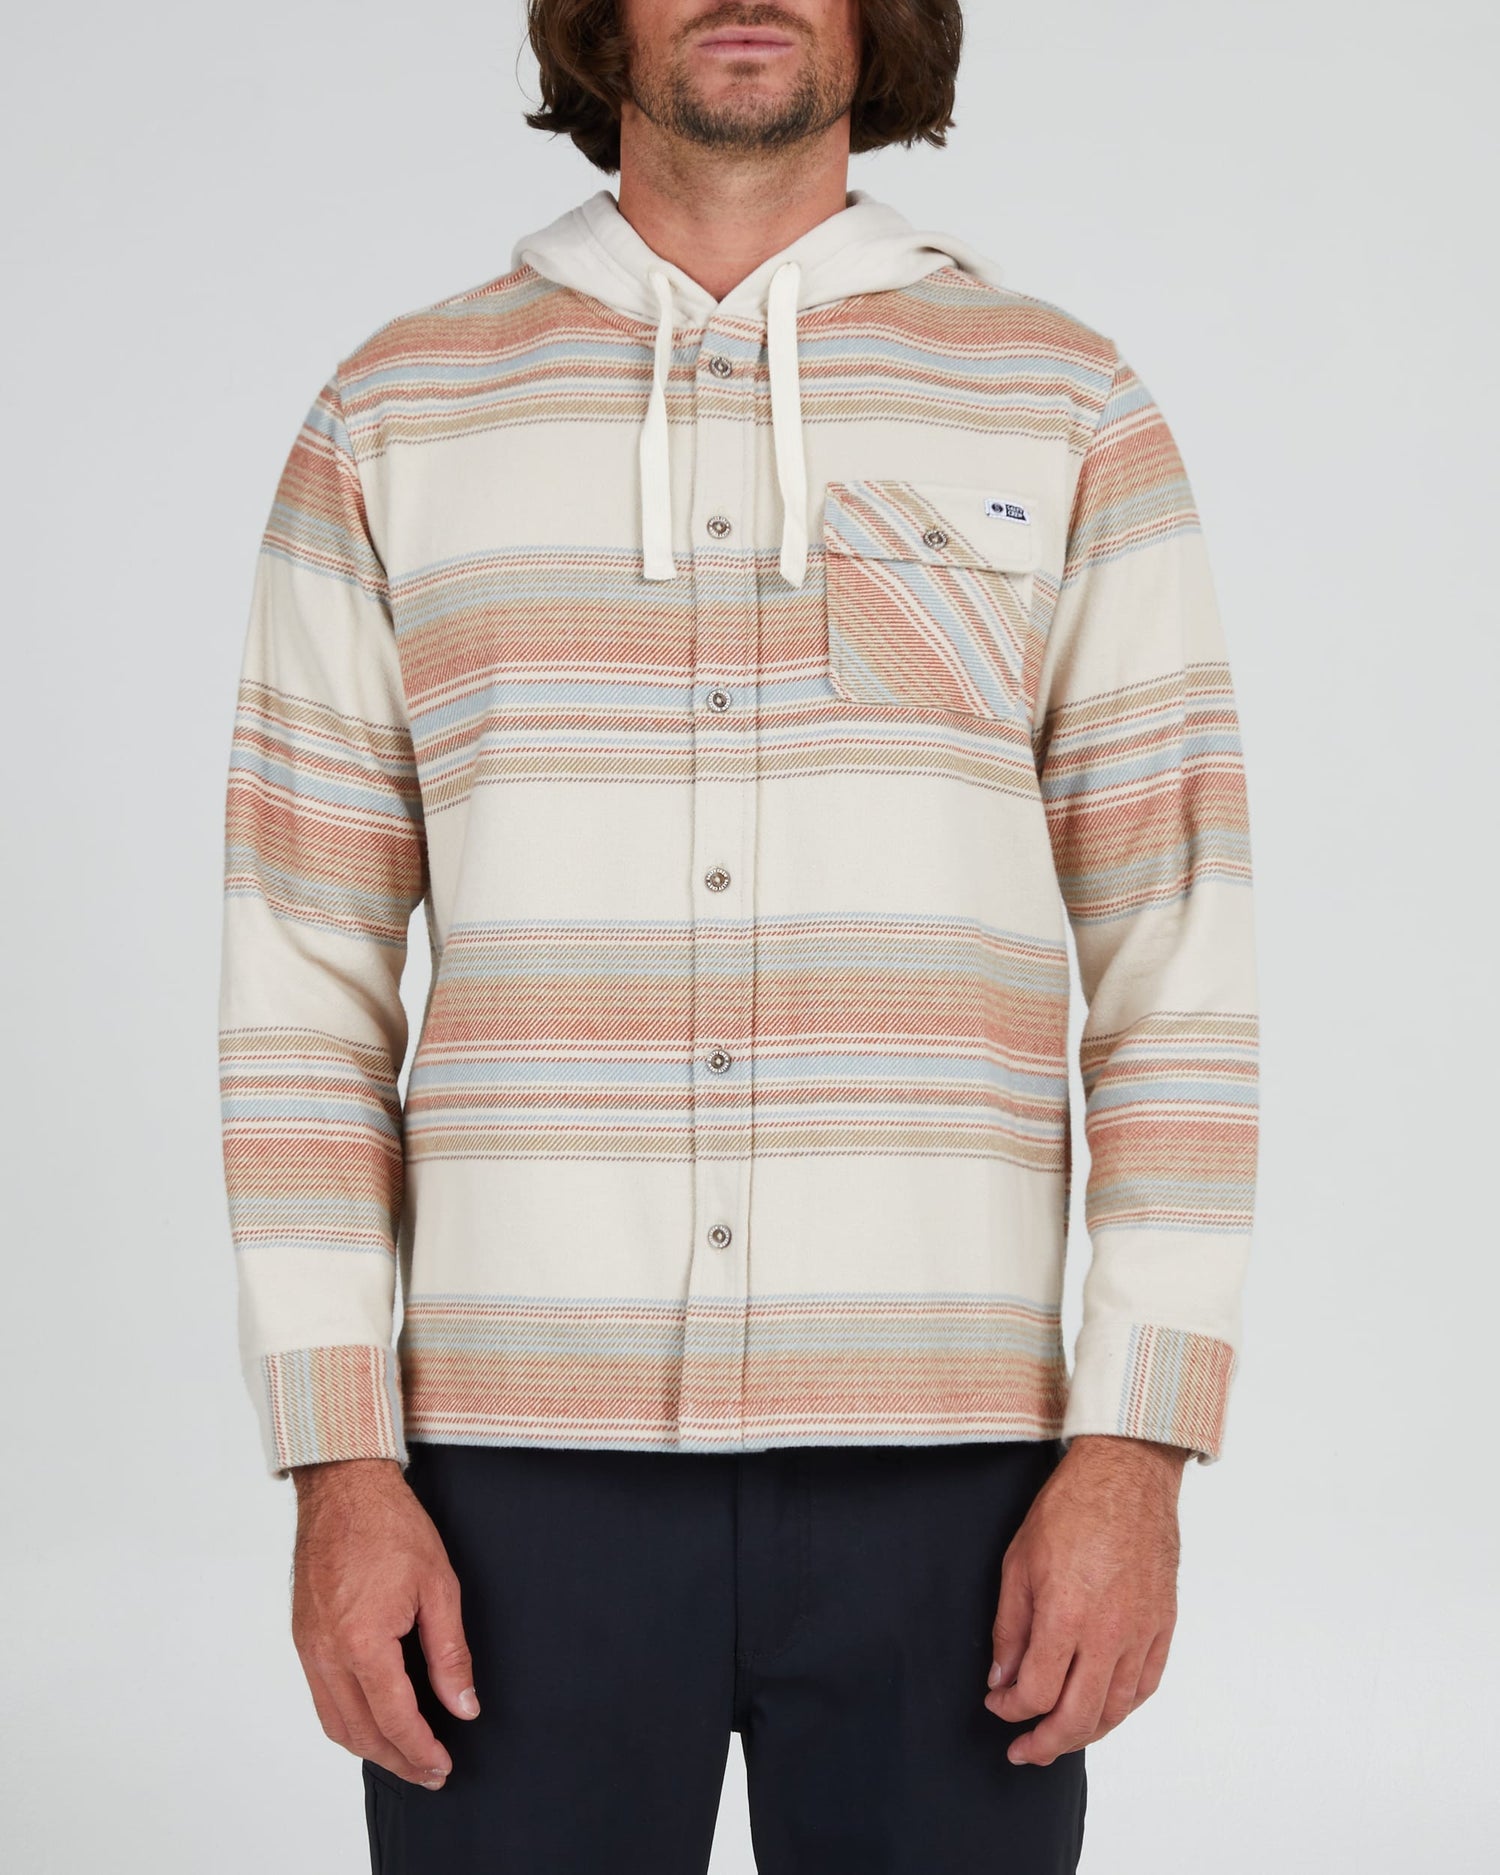 Salty crew WOVEN SHIRTS OUTSKIRTS FLANNEL - Peyote in Peyote